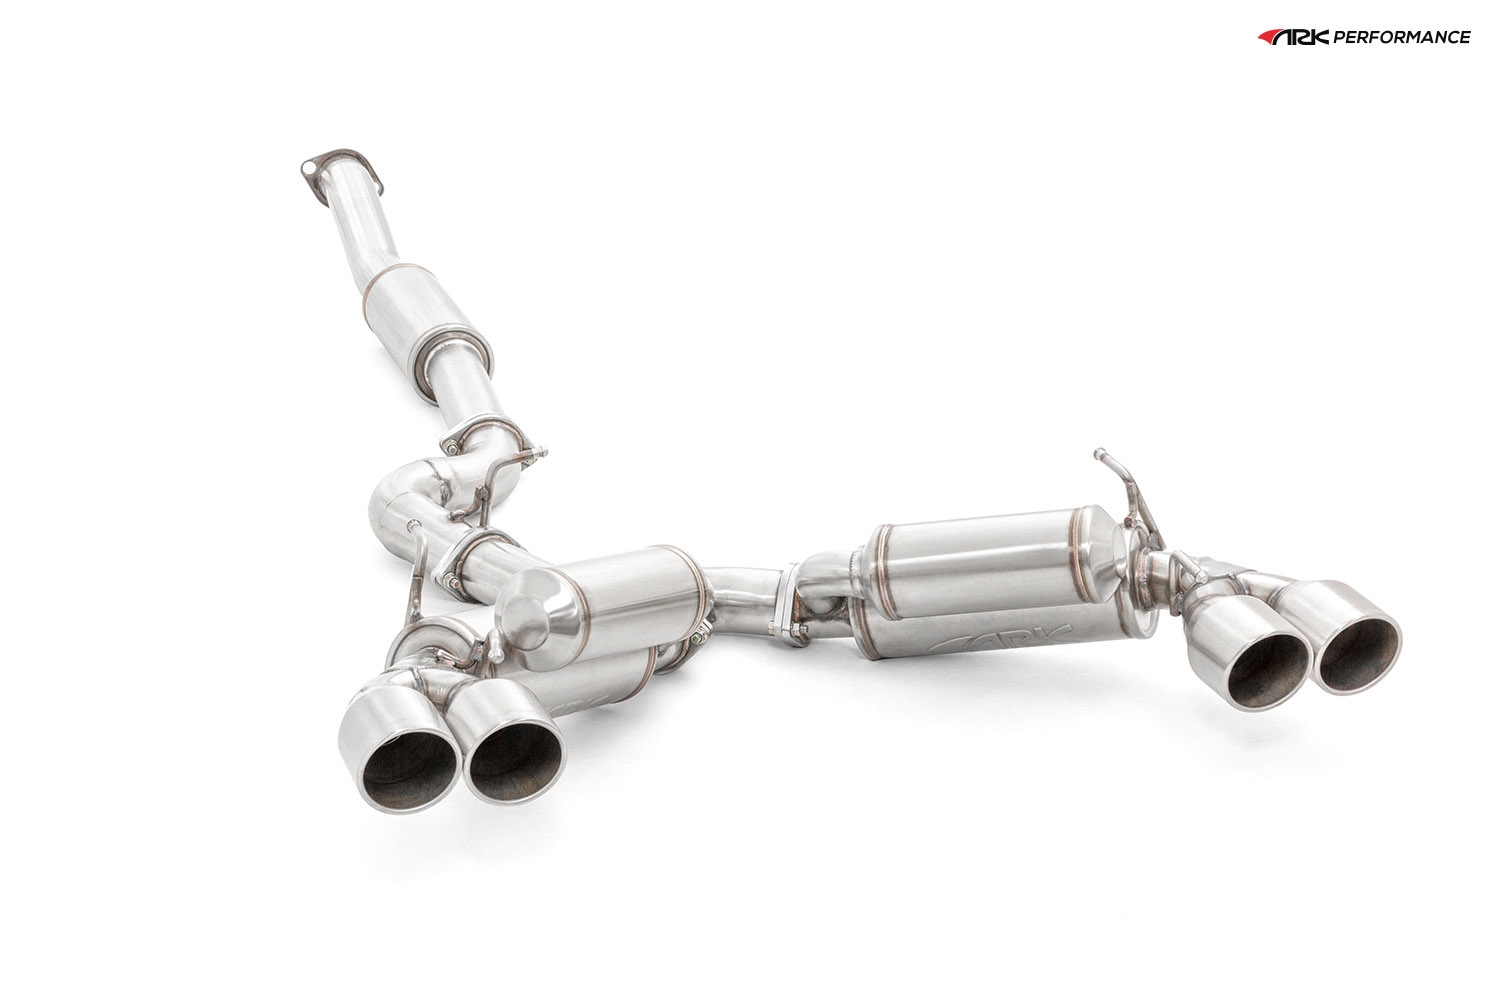 Ark Performance Stainless Steel GRiP Cat-Back Exhaust System 3.0in Pipe w/ 4.0 Polished Quad Tip, Dual Exit - Subaru WRX / STI Hatchback 08-14 2.5L H4 TURBO GR